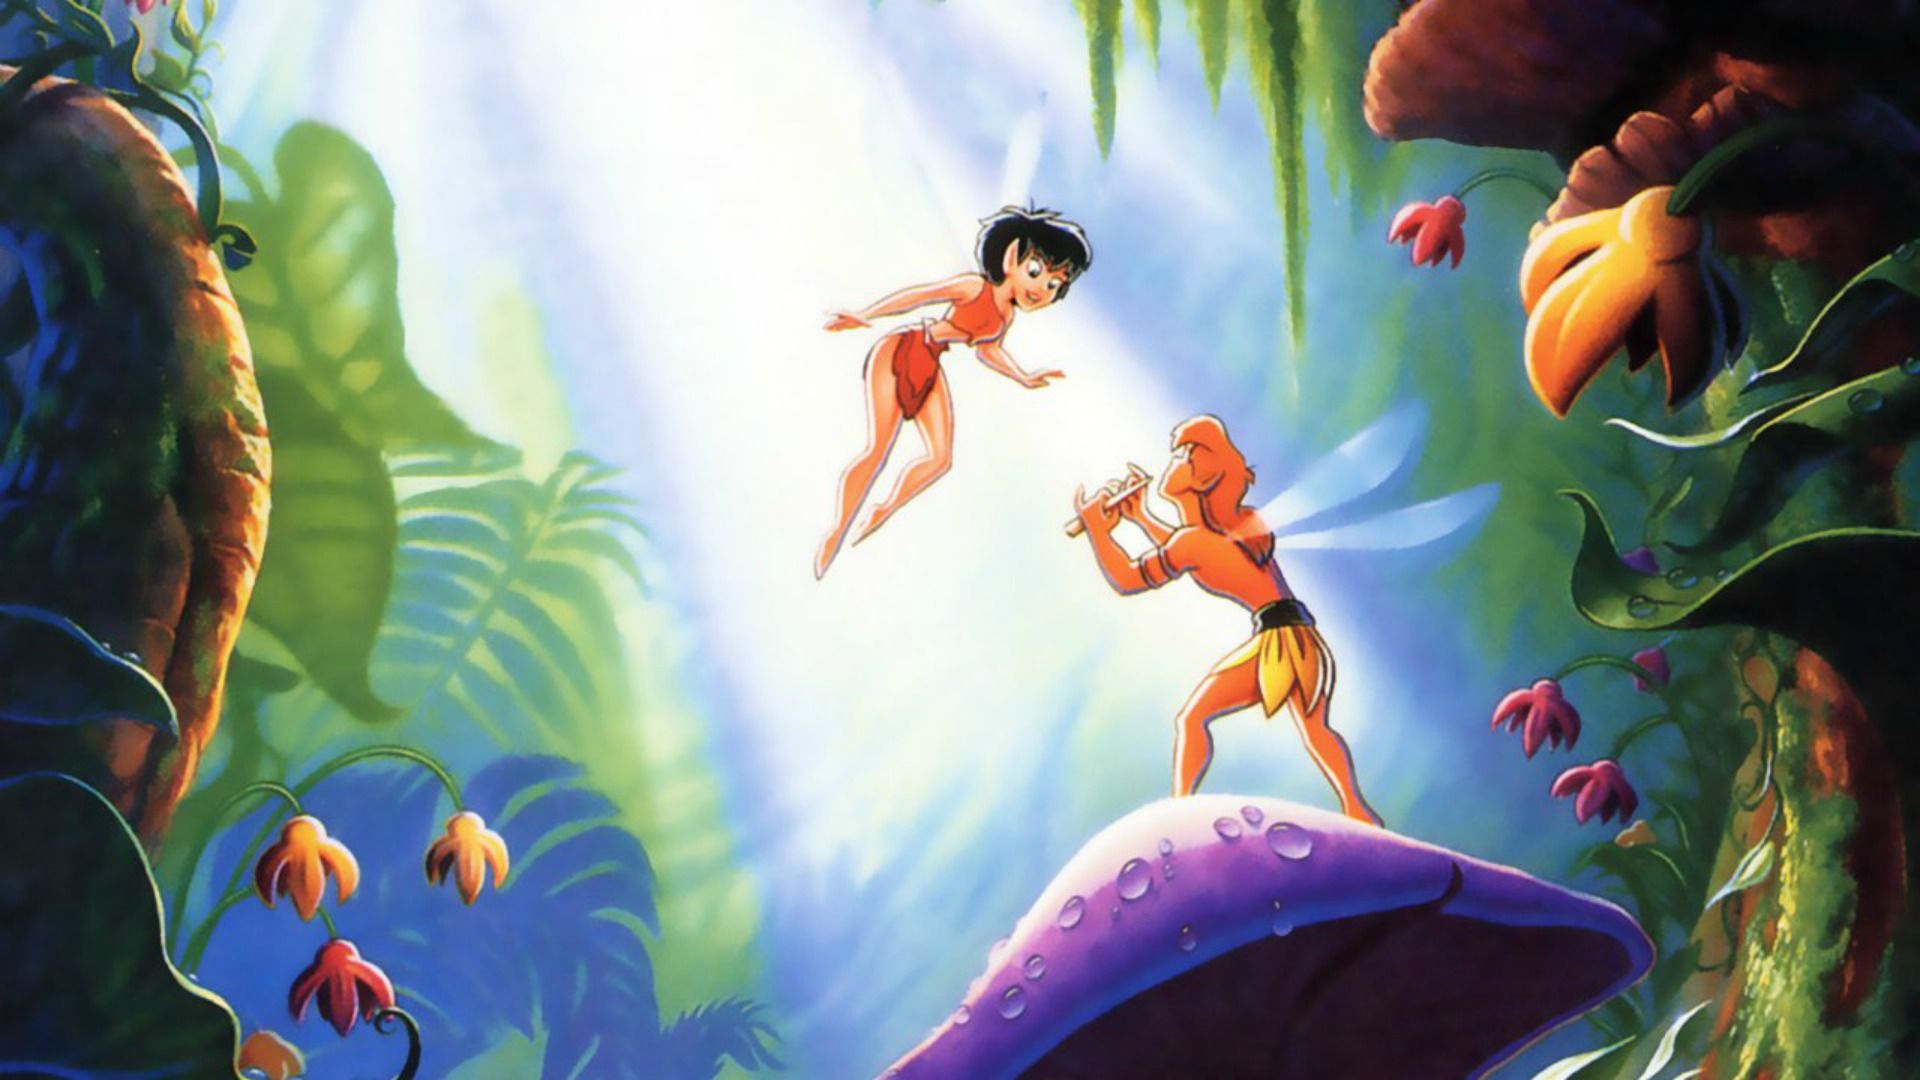 FernGully: The Last Rainforest background